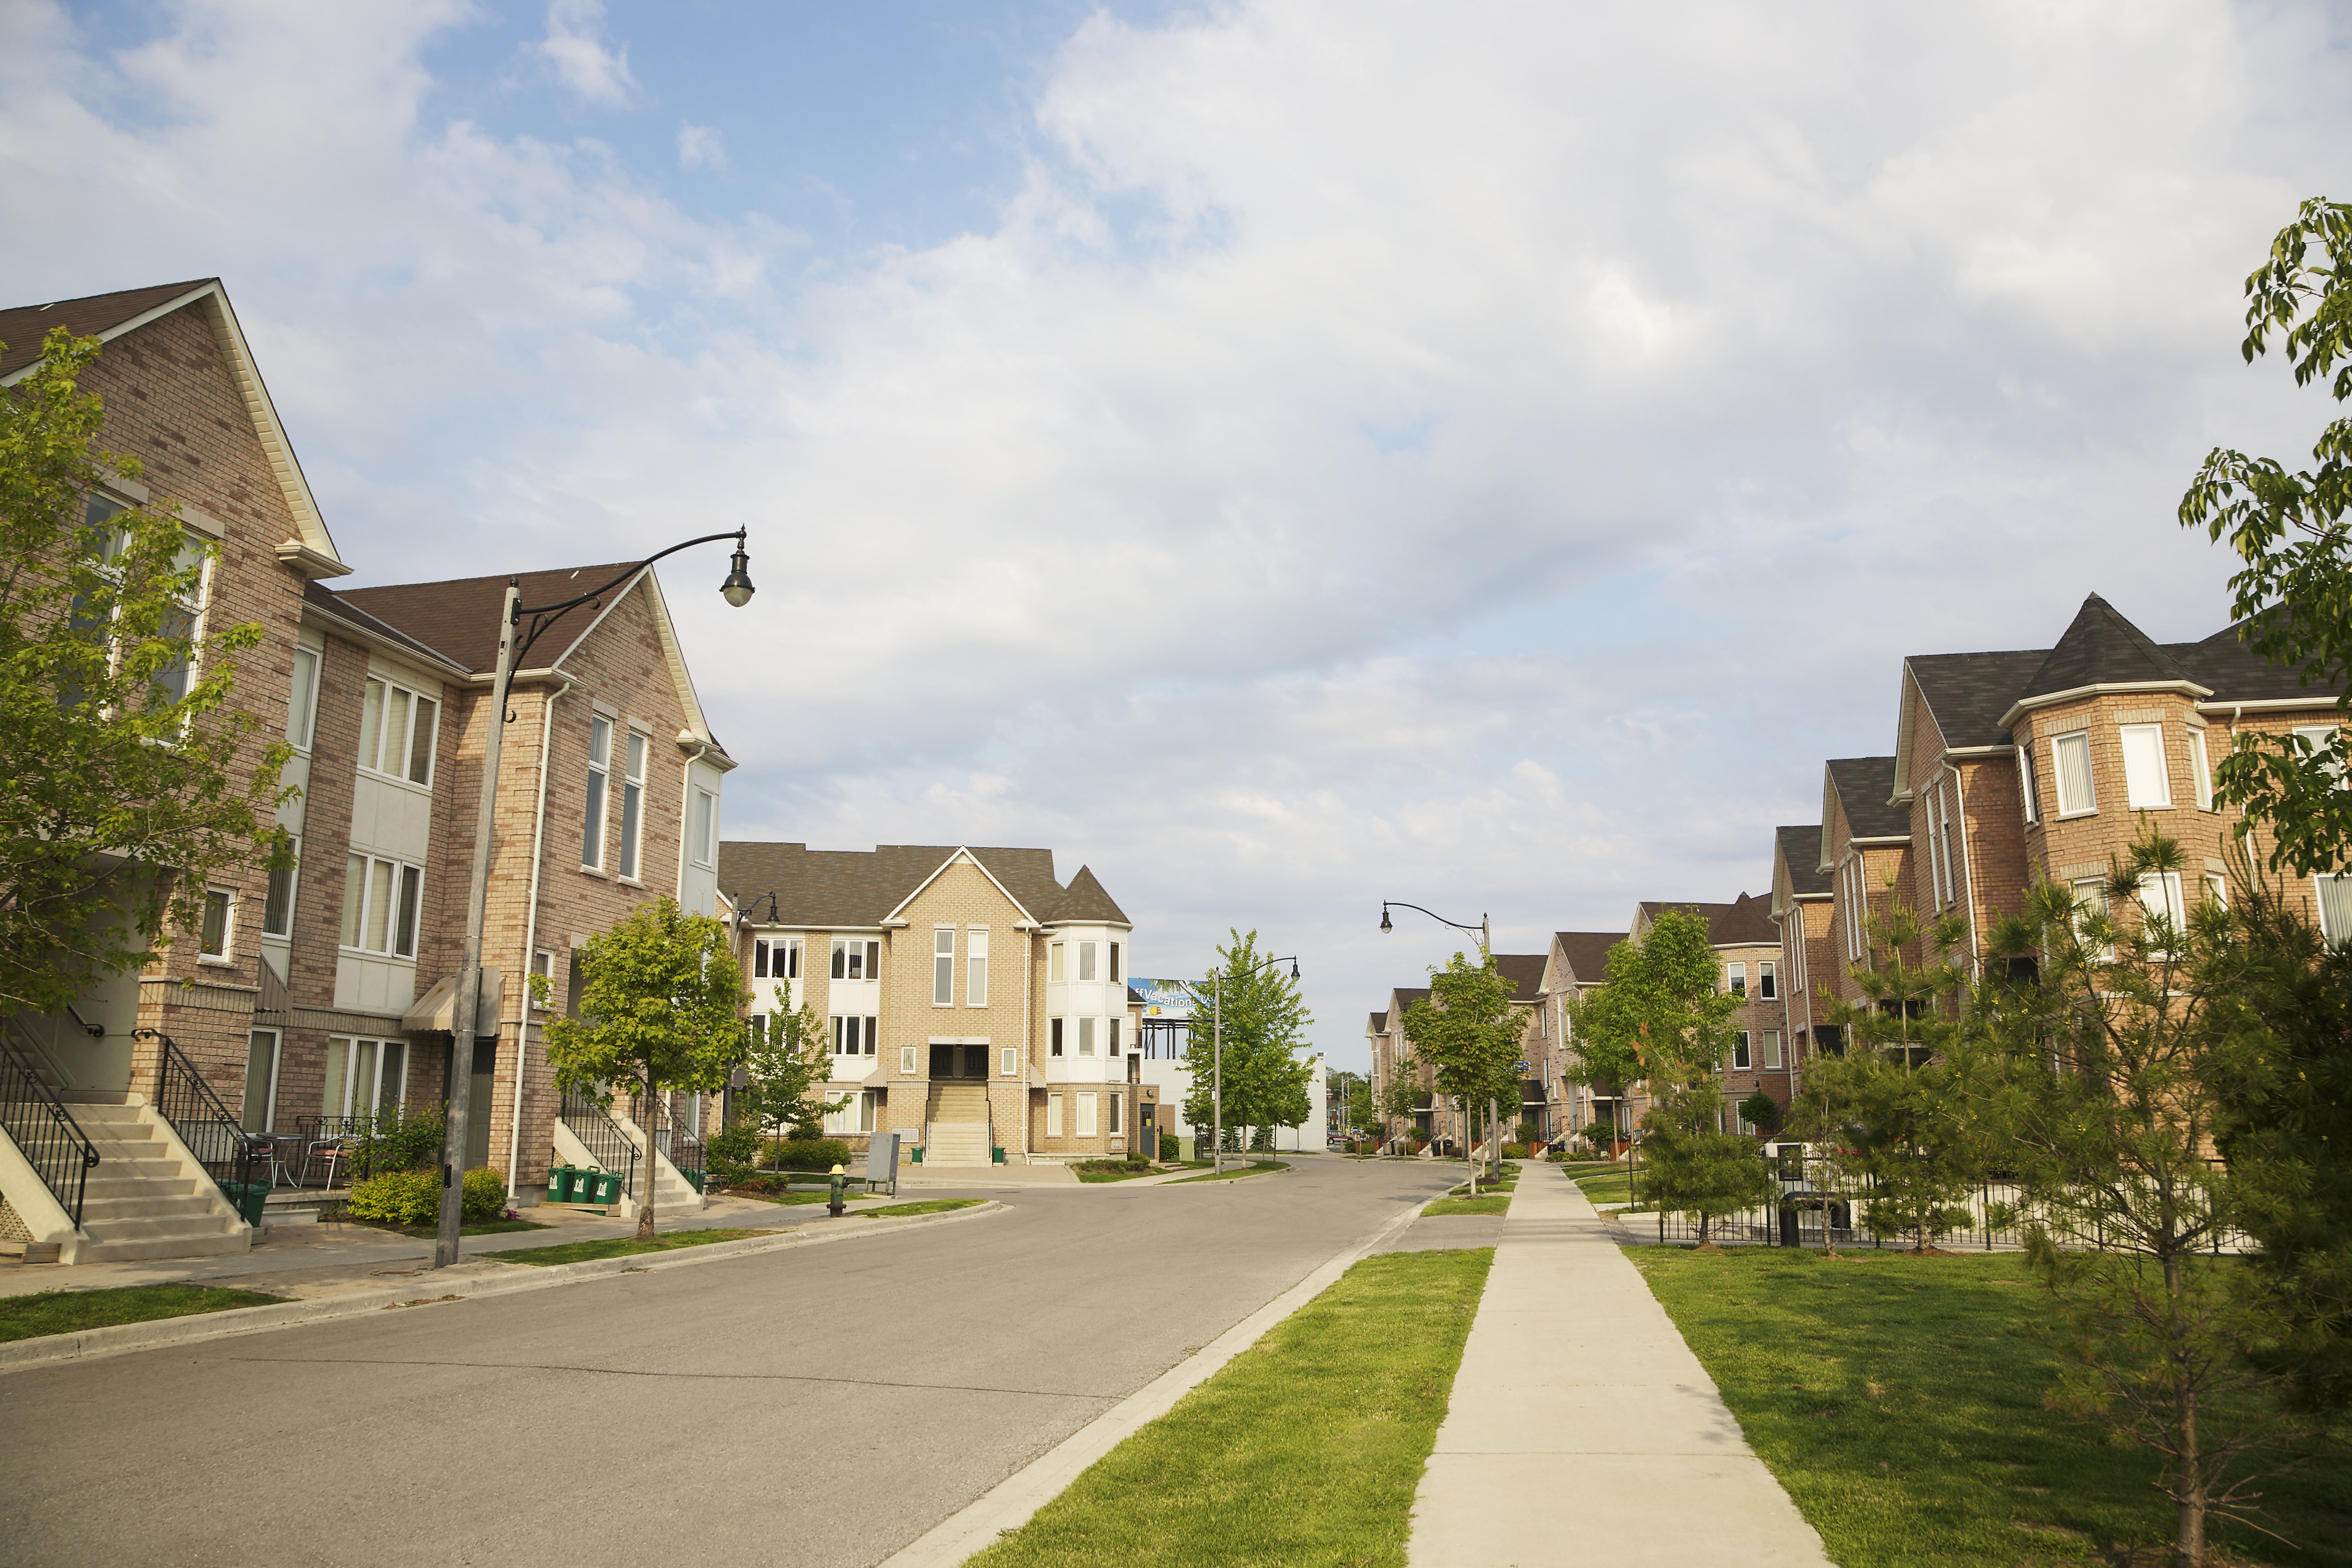 Suburbs: Why I Realized They're Paradise | Time